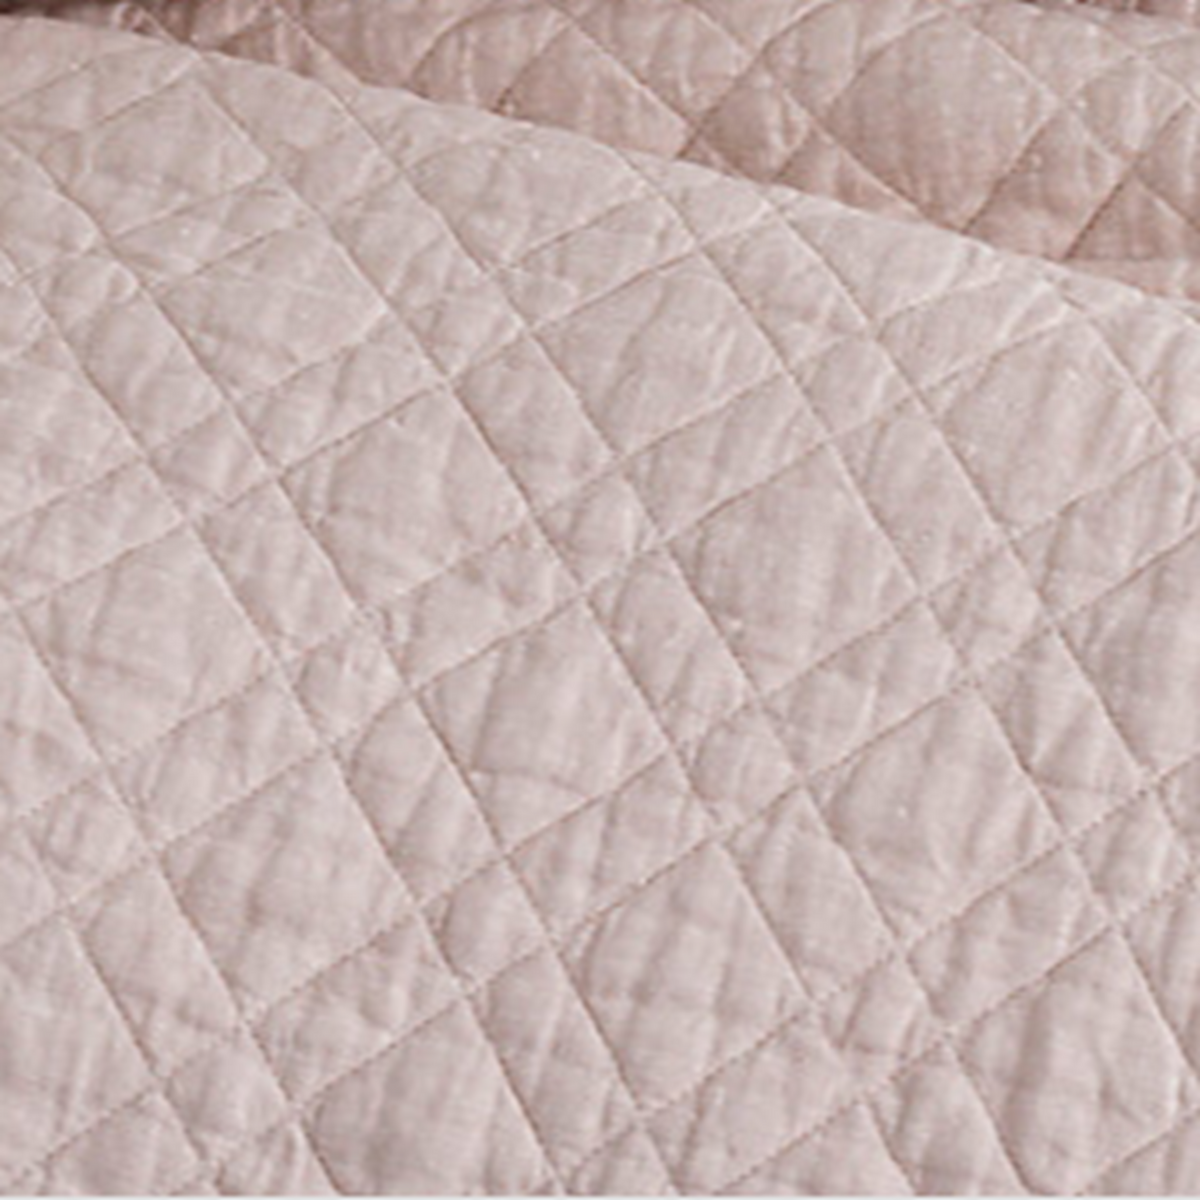 Swatch Sample of Pine Cone Hill Washed Linen Quilted Bedding in Slipper Pink Color